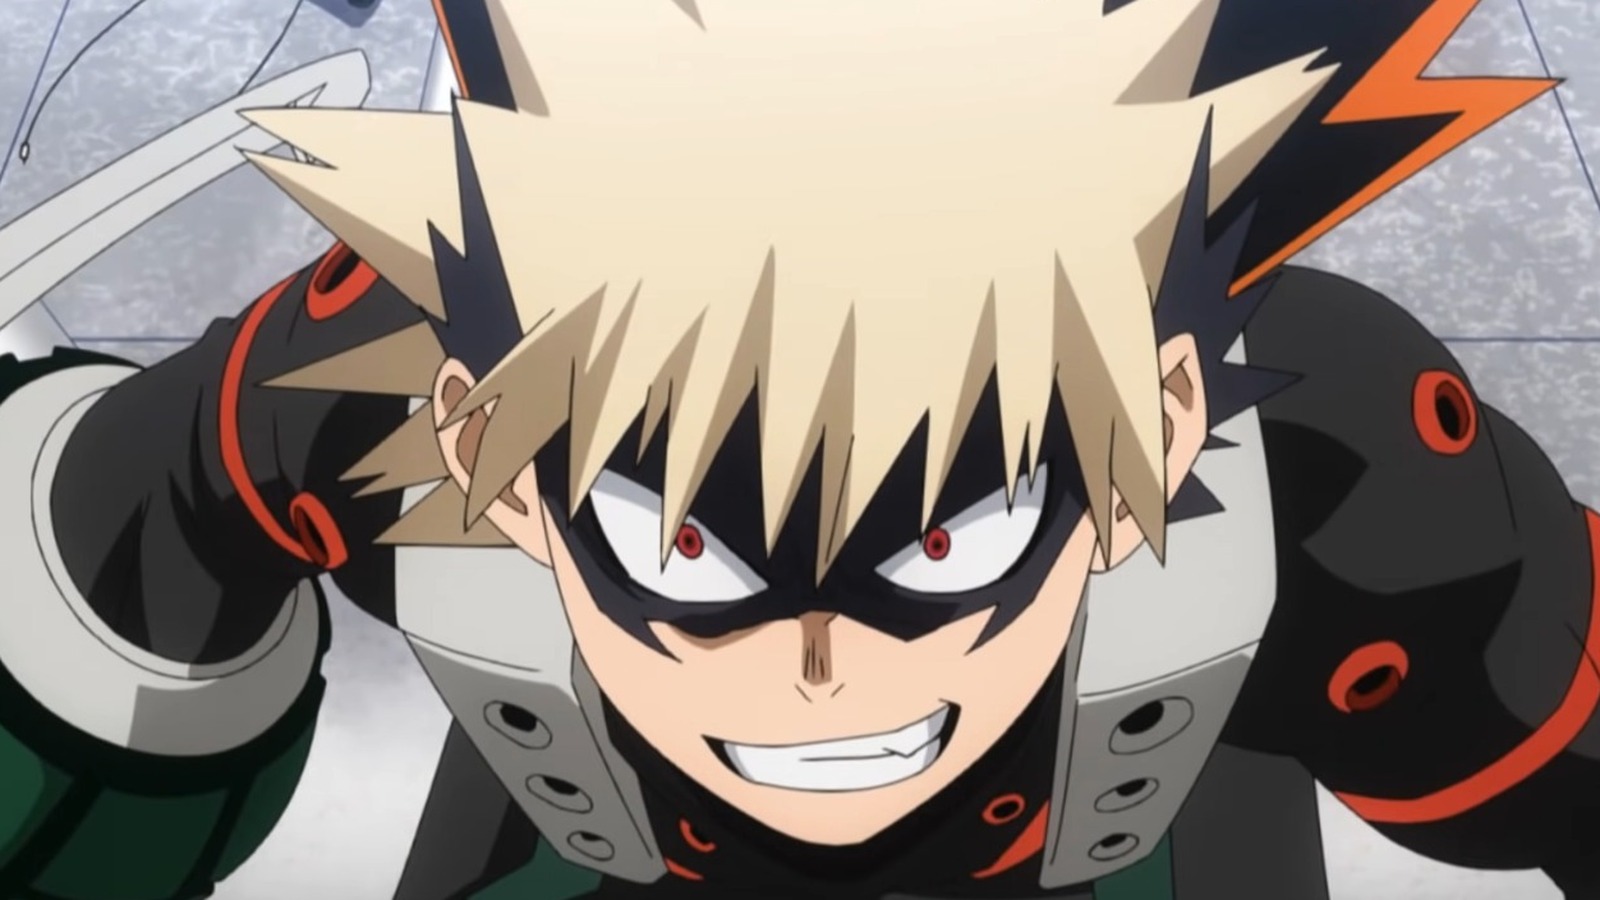 derek donald recommends show me a picture of bakugo pic